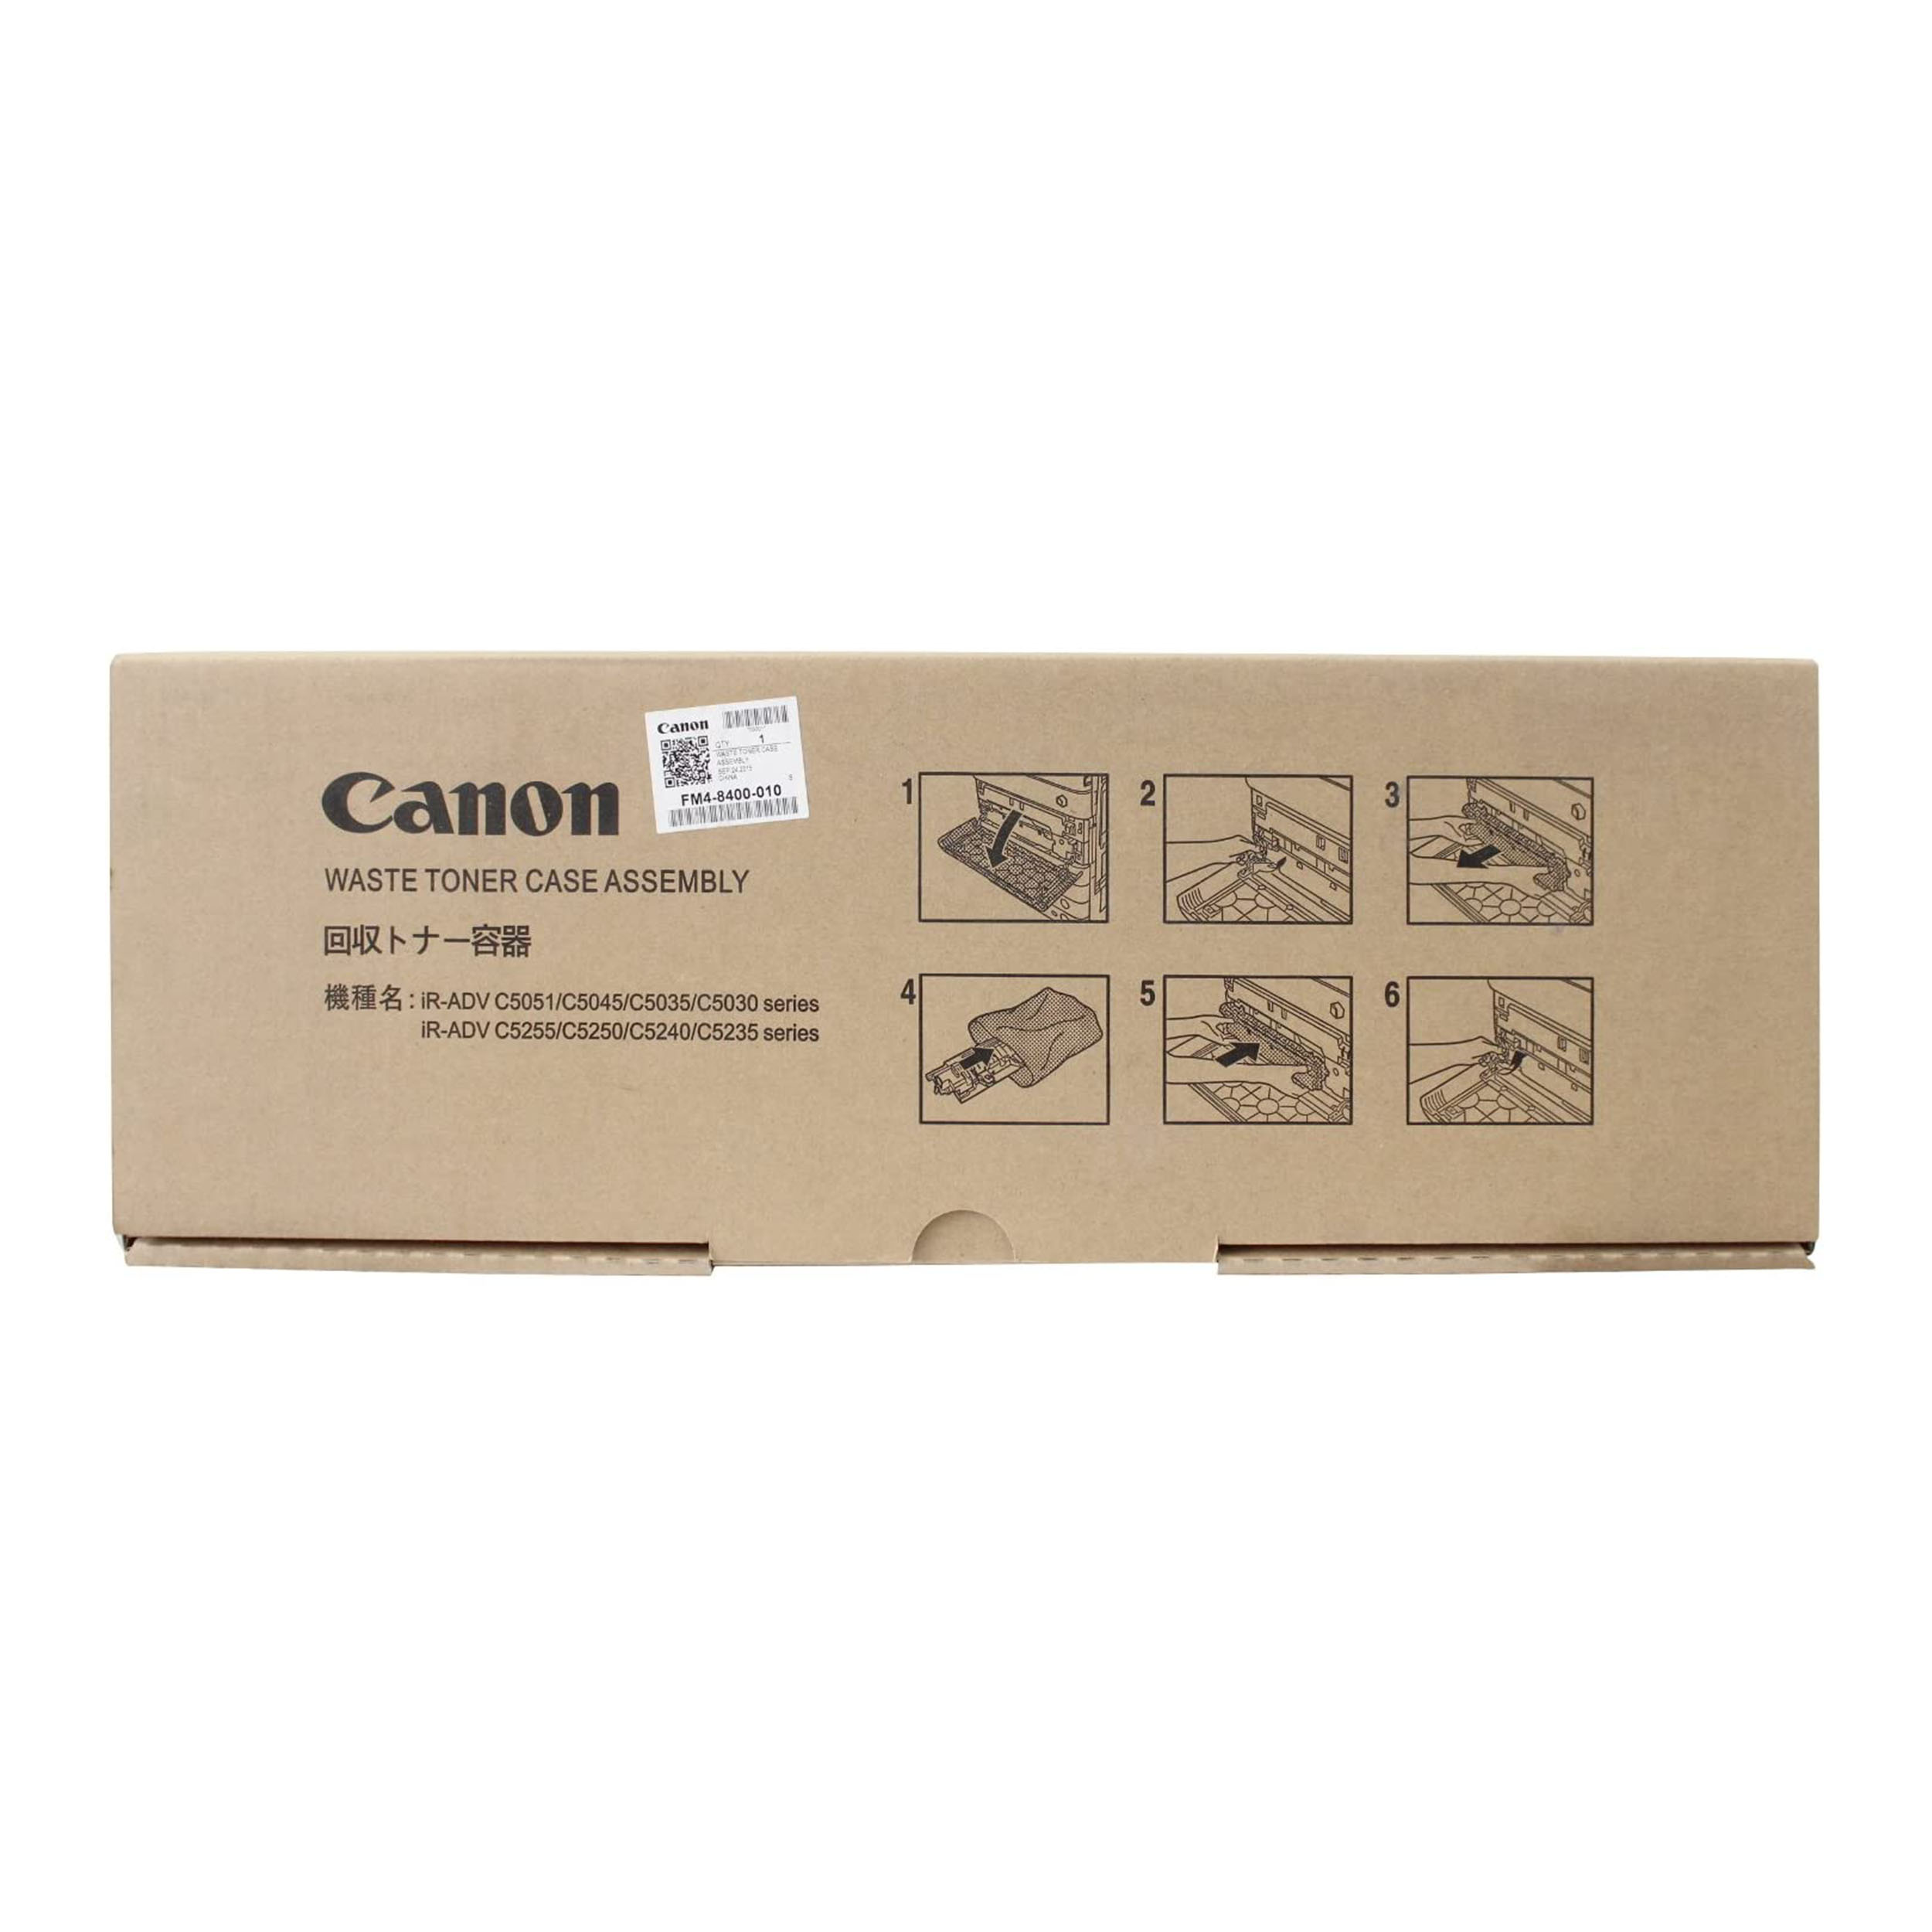 Waste Toner Cartridge For Canon FM4-8400-010 - Clear Choice Services